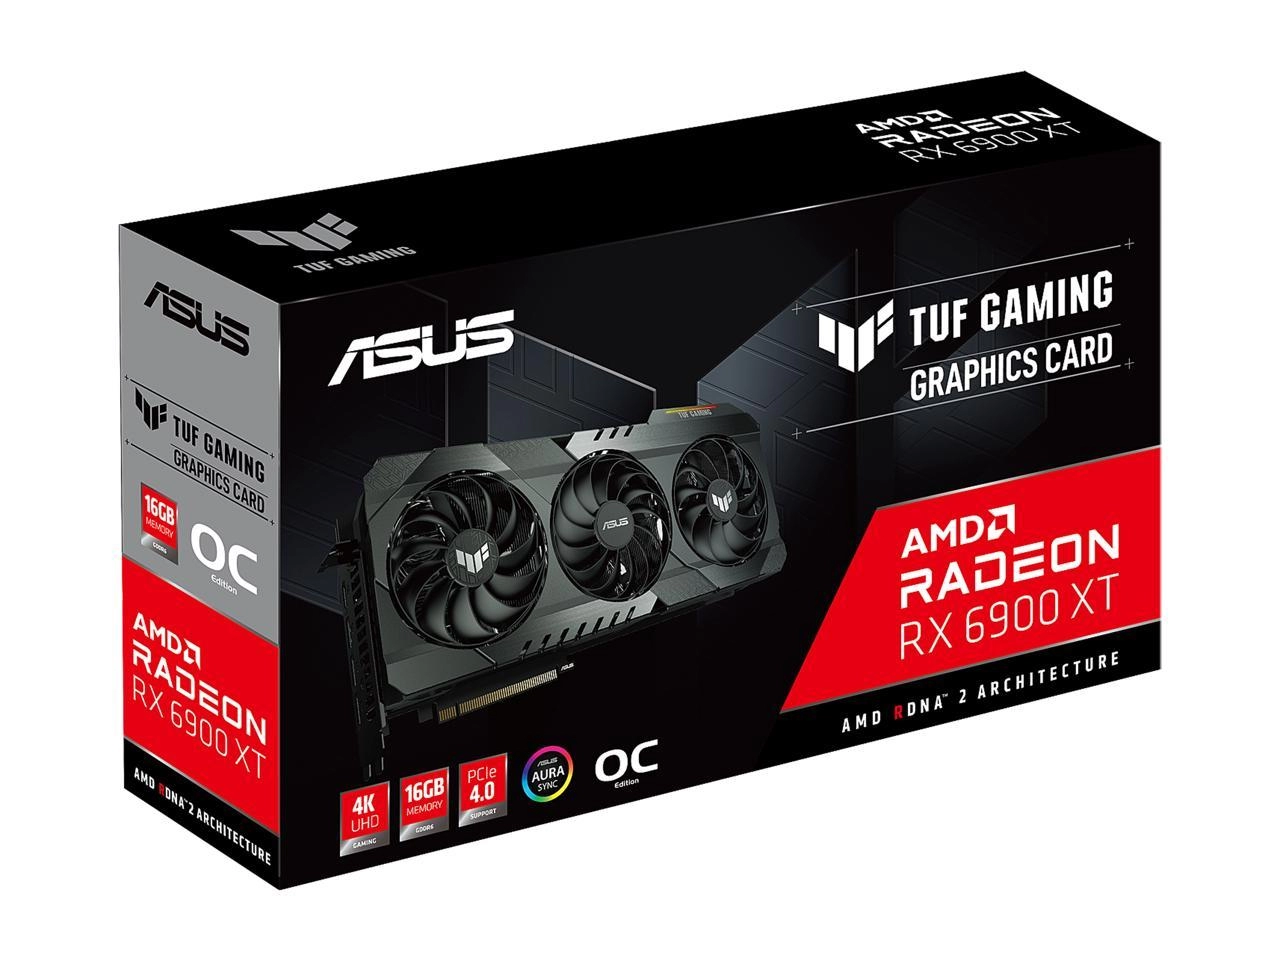 ASUS TUF GAMING Radeon RX 6900 XT OC Edition Package Content